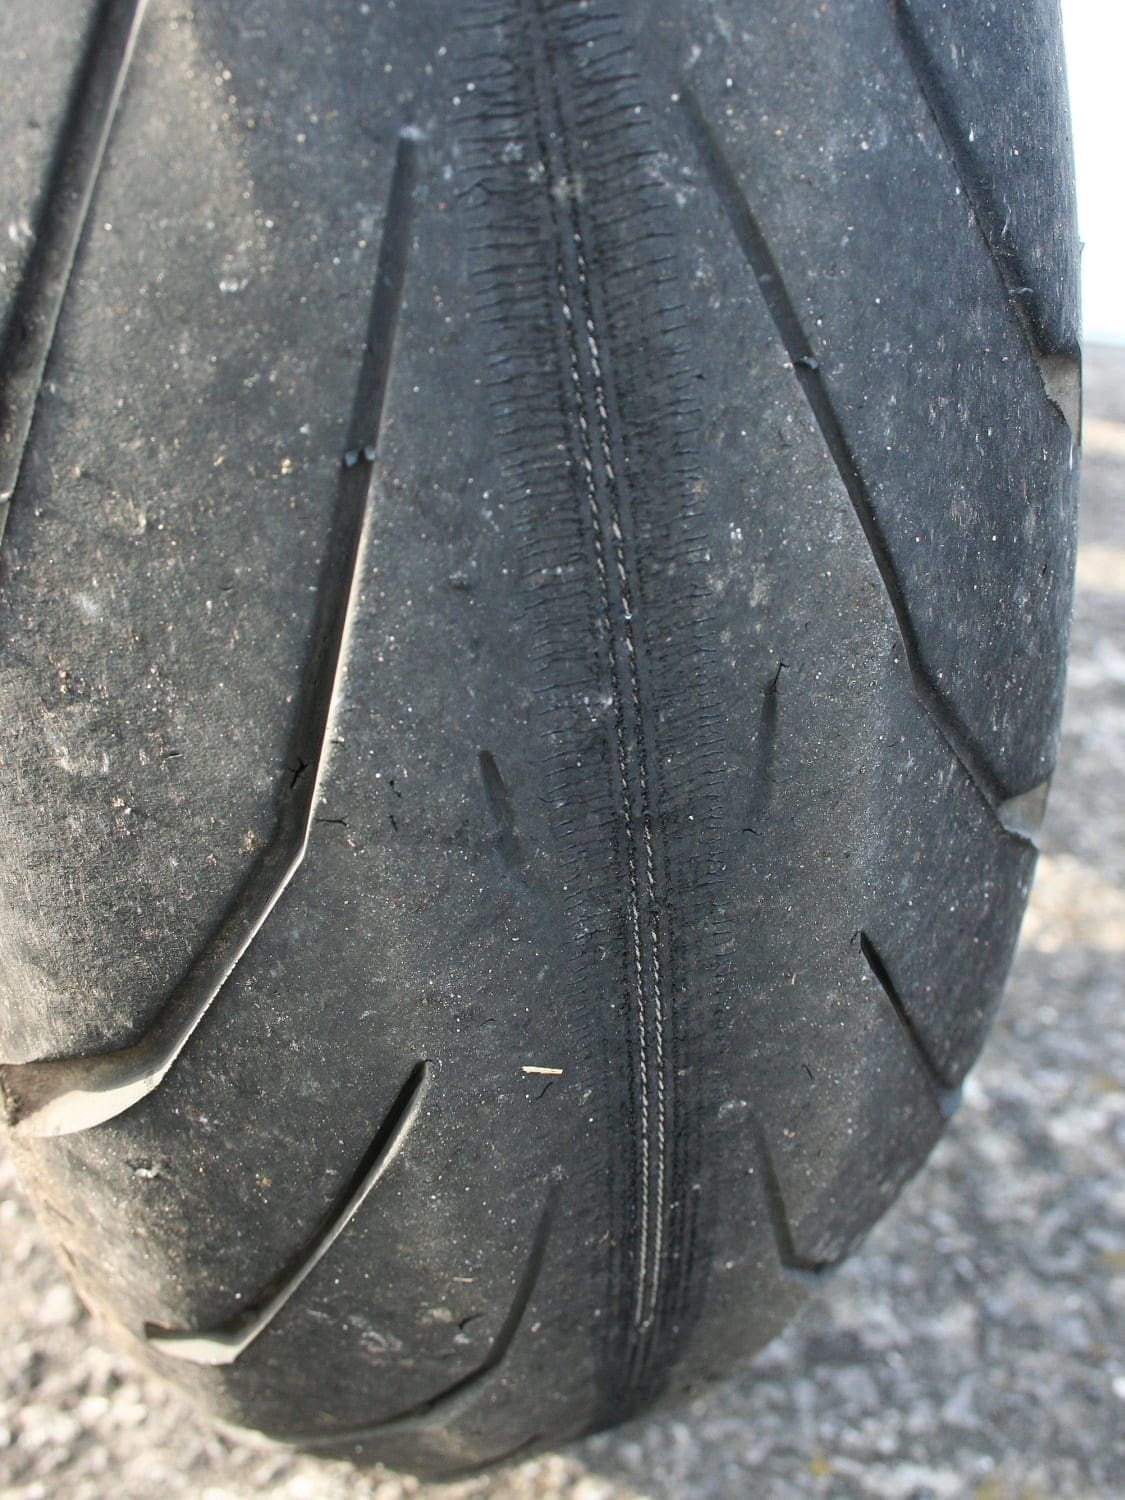 Don't buy anything with tyres like this...